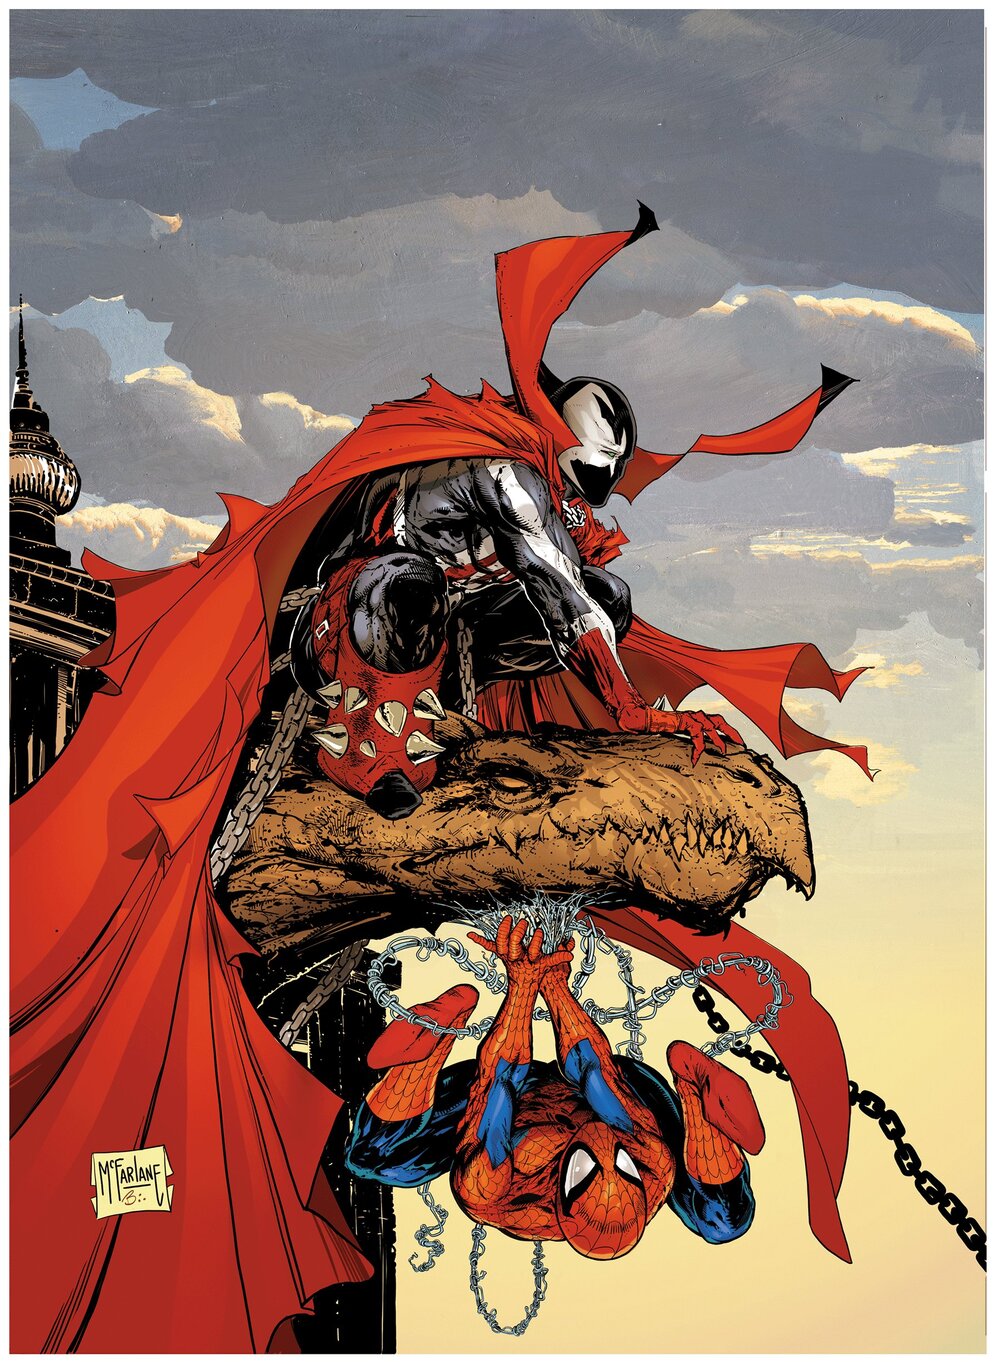 todd-mcfarlane-brings-spawn-and-spider-man-together-for-the-first-time-in-comic-art2